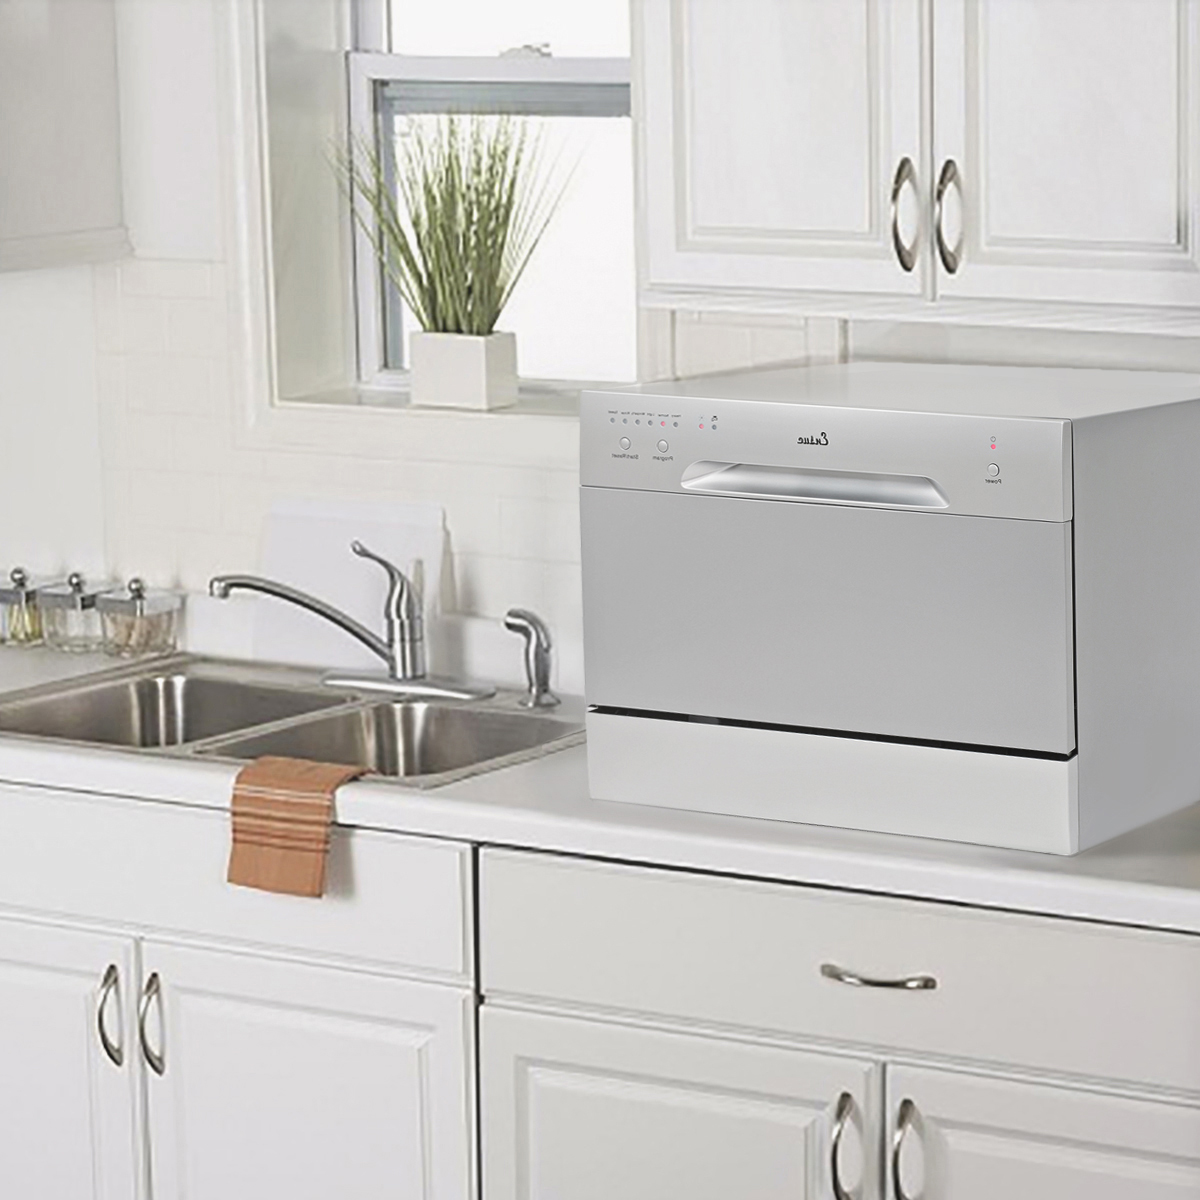 Ensue Countertop Dishwasher Energy Star Certified 6-Place 6-Program Setting, Silver - image 2 of 7